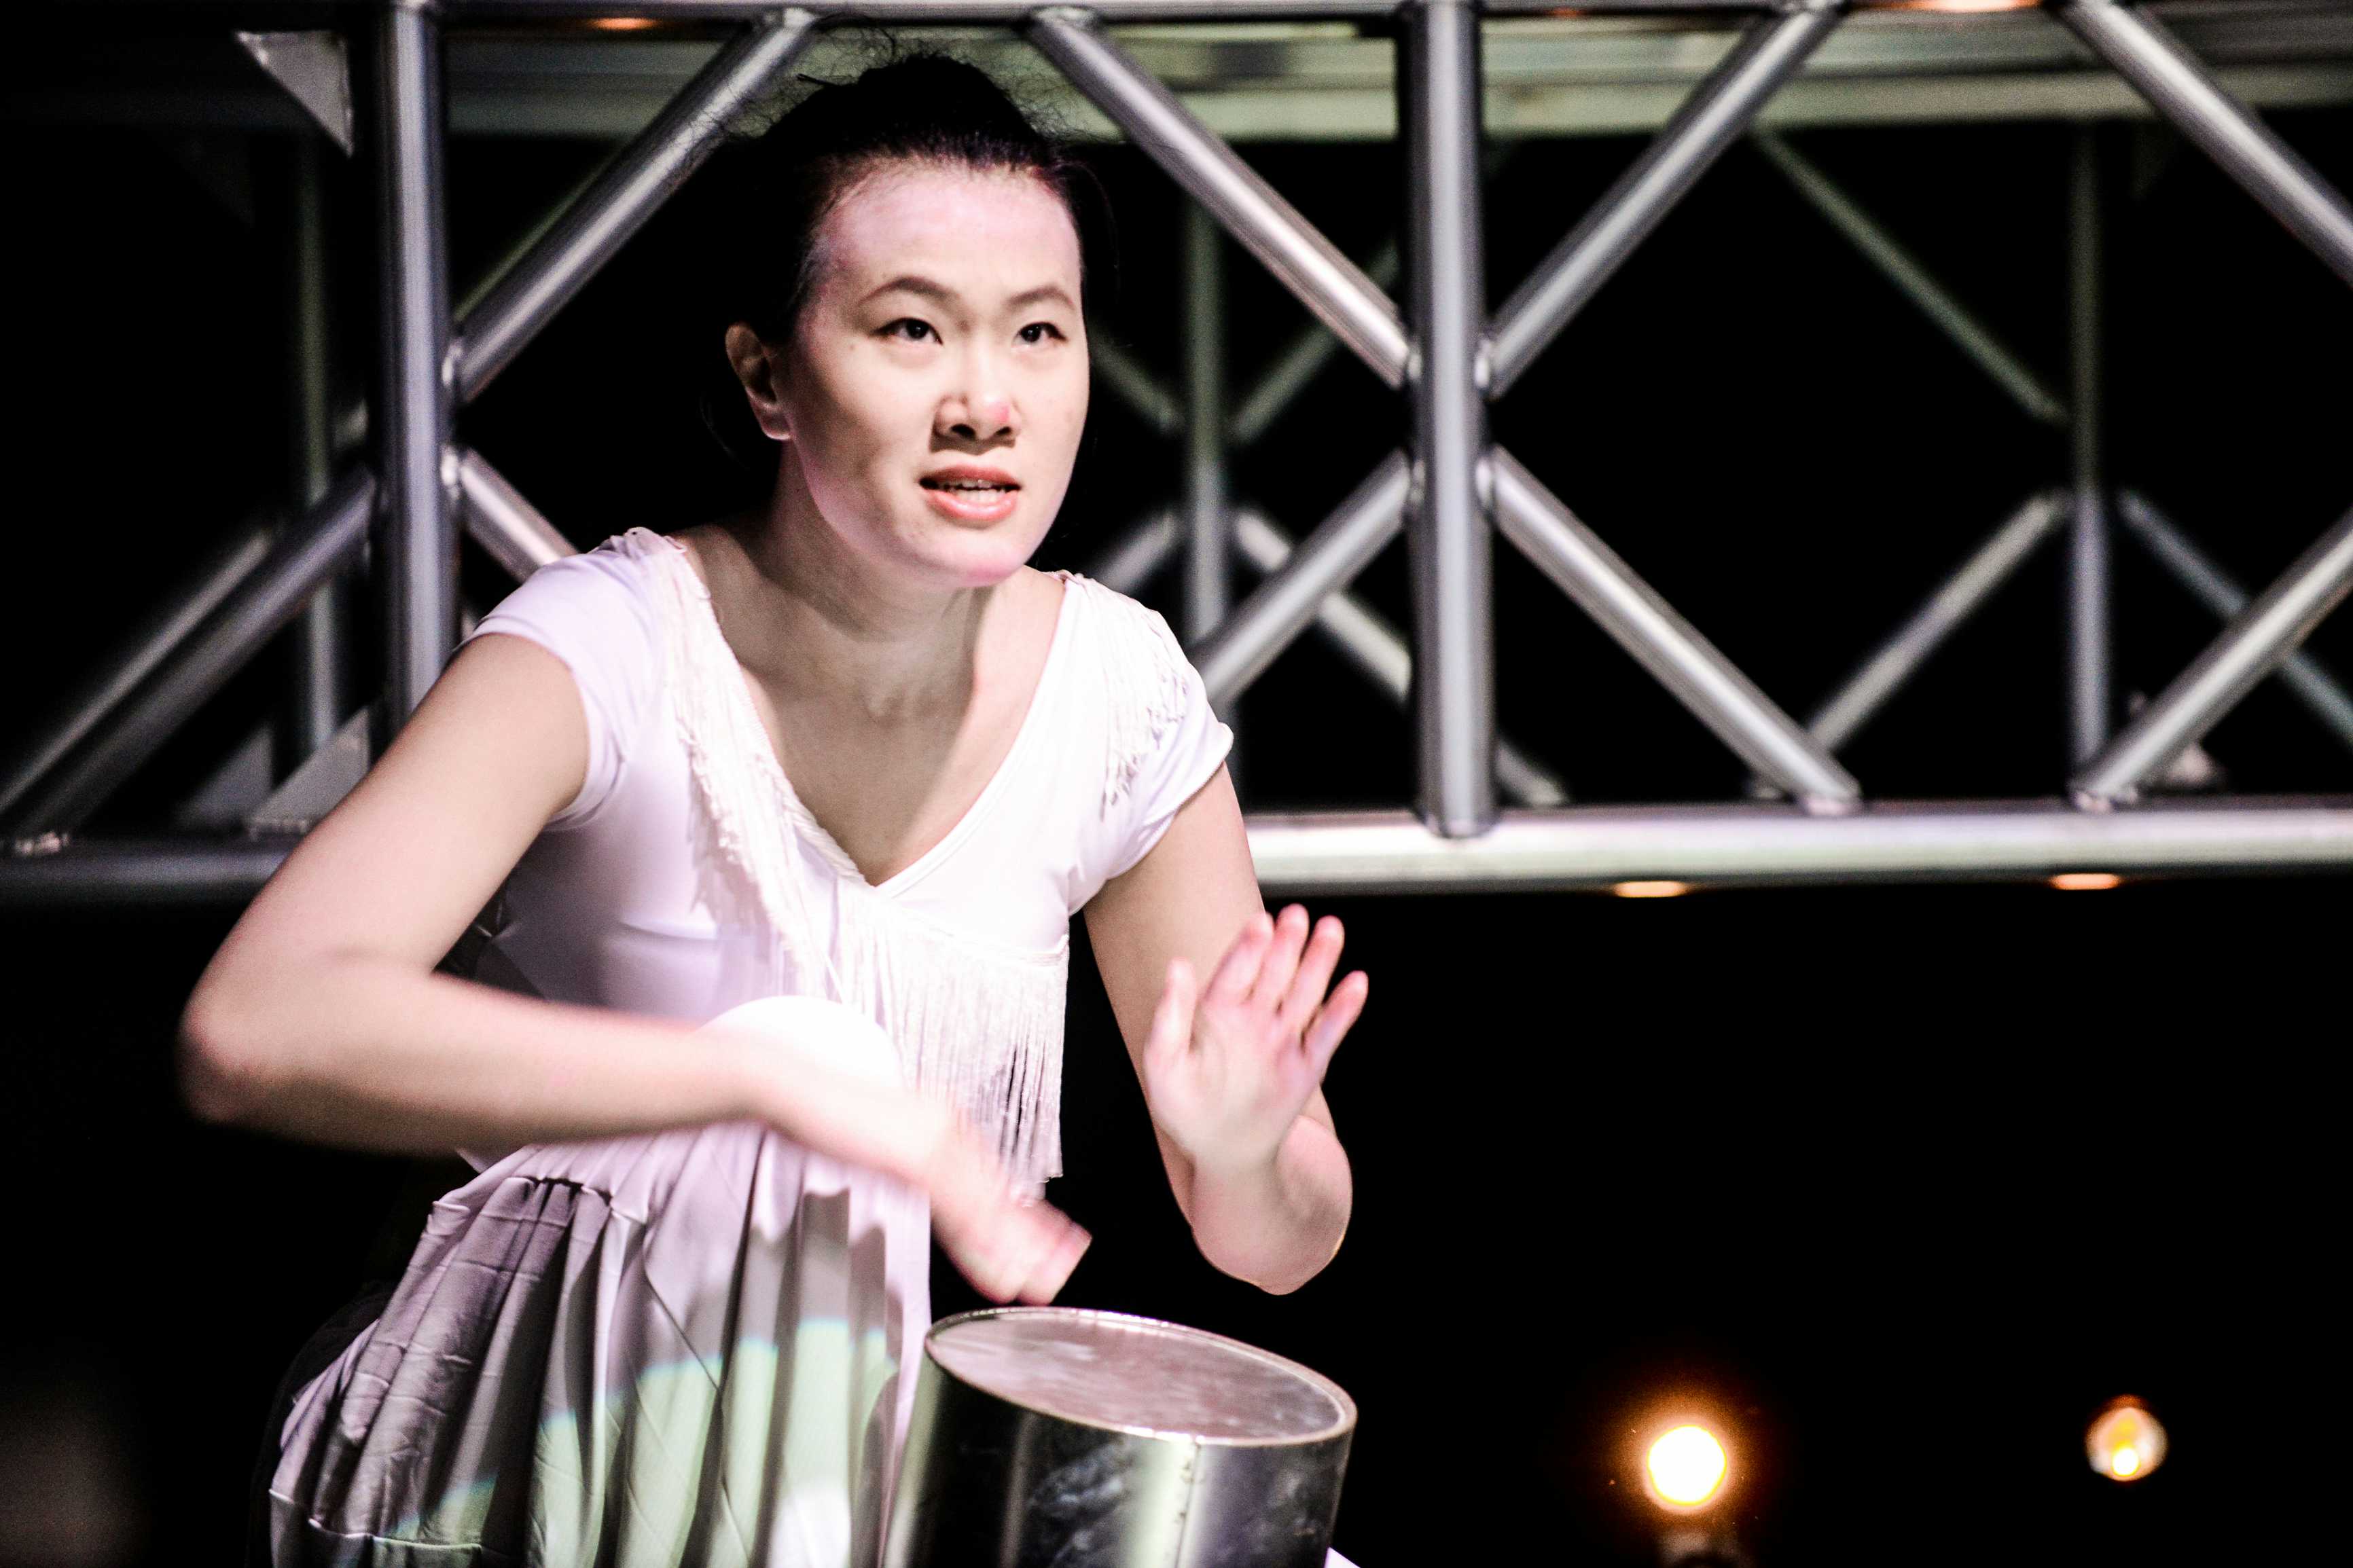 The Beautiful Ones | Featuring: Michelle Li | Tagged as: Show, The Beautiful Ones | Photo: Fung Wai Sun |  (Rooftop Productions • Hong Kong Theatre Company)  | Rooftop Productions • Hong Kong Theatre Company